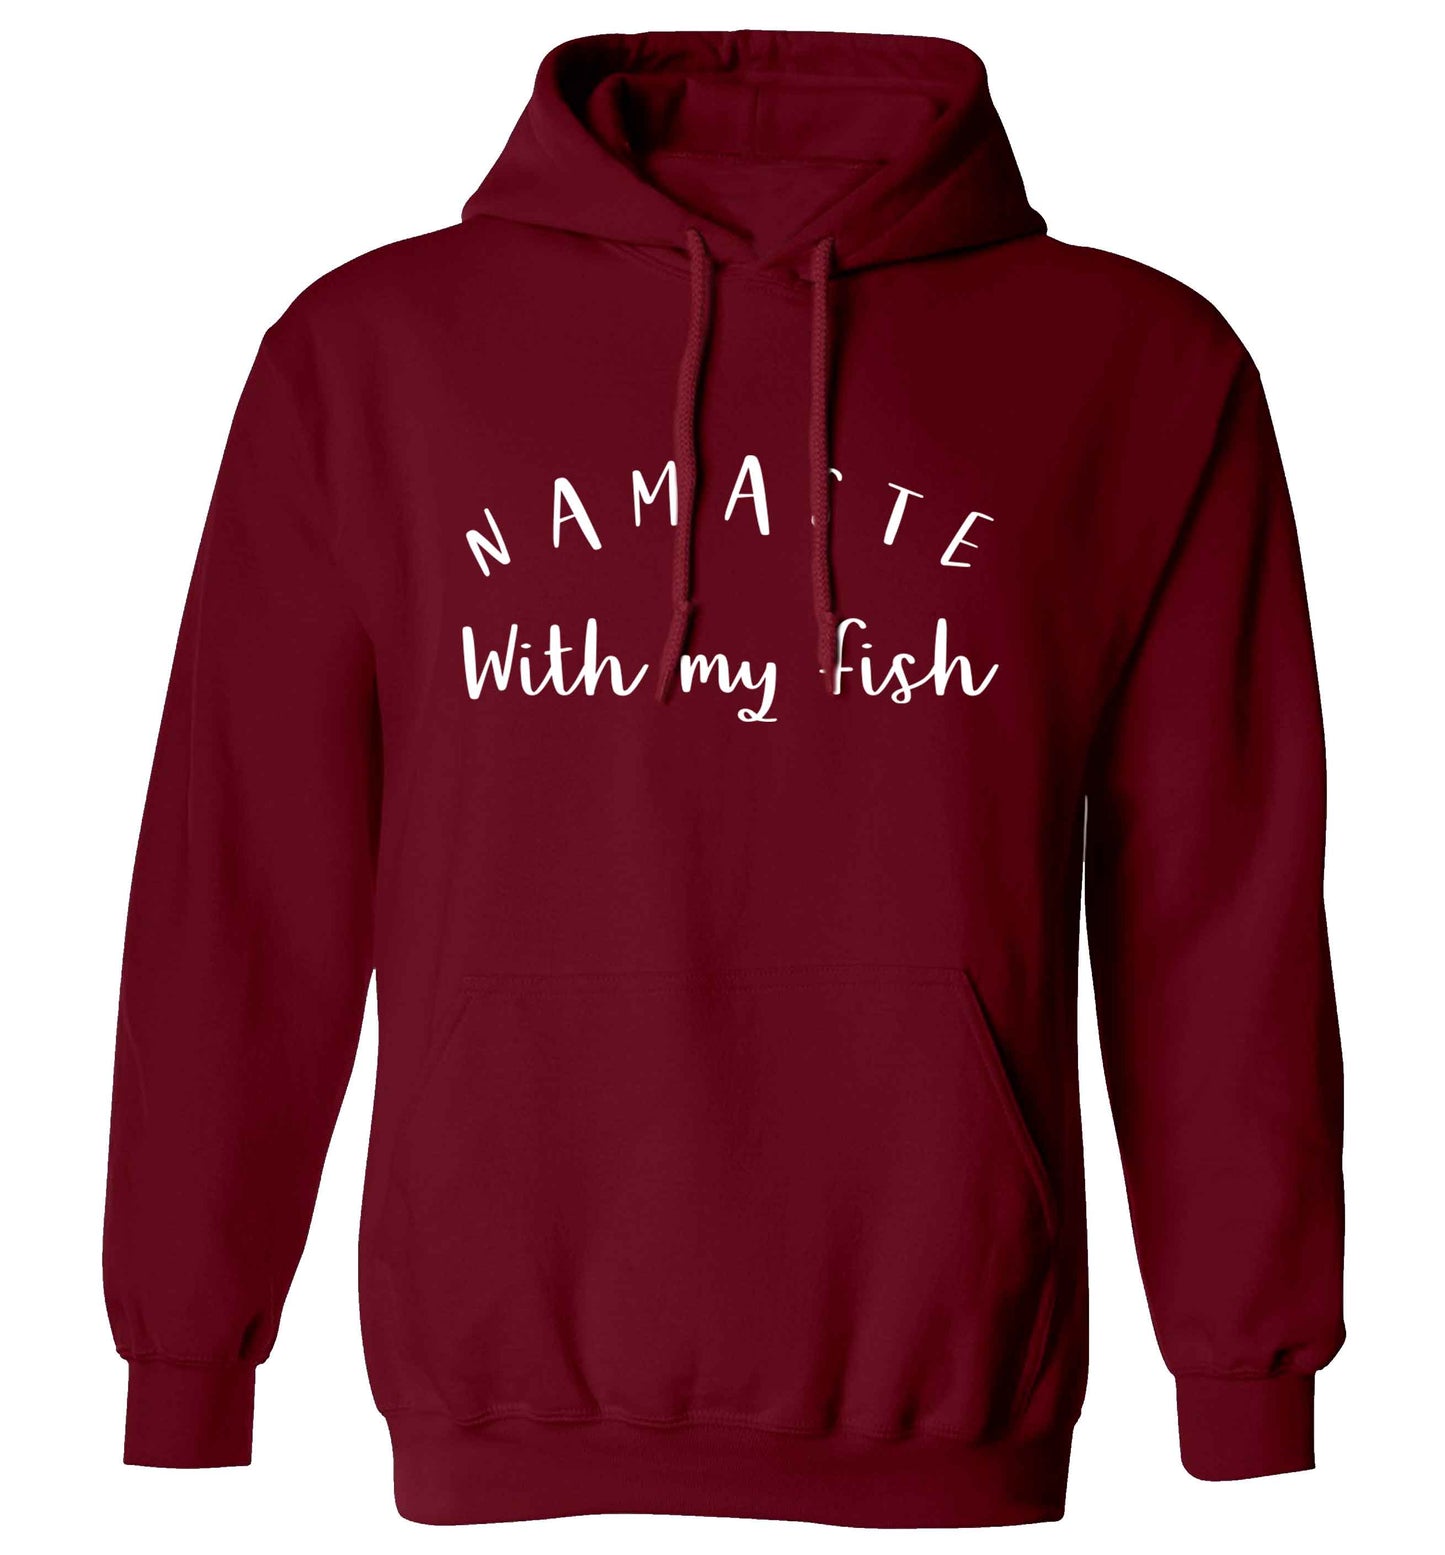 Namaste with my fish adults unisex maroon hoodie 2XL